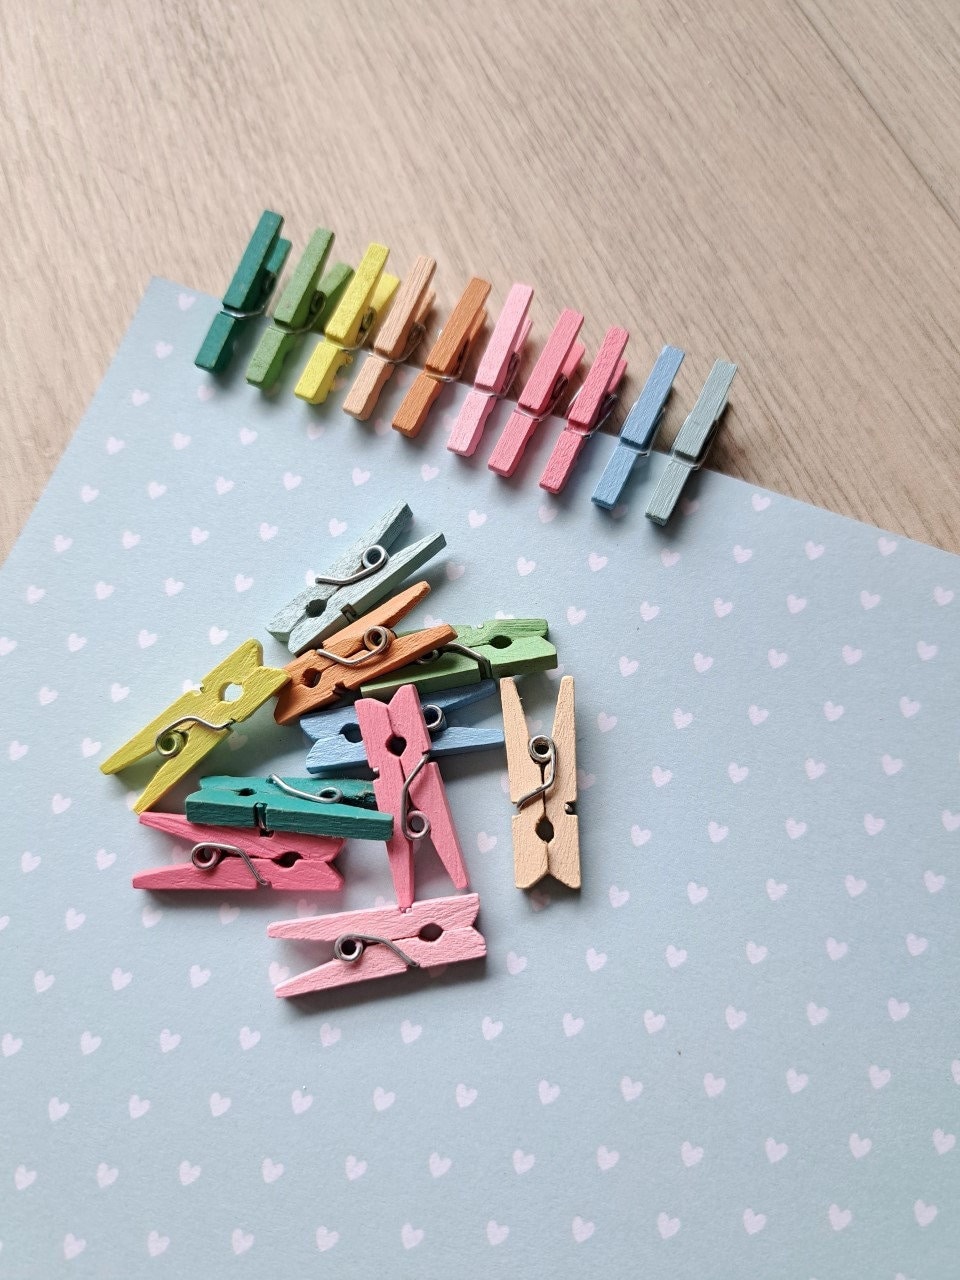 Small Wooden Craft Clips 3.5 Cm (pack Of 10 Pieces) Pegs Mixed